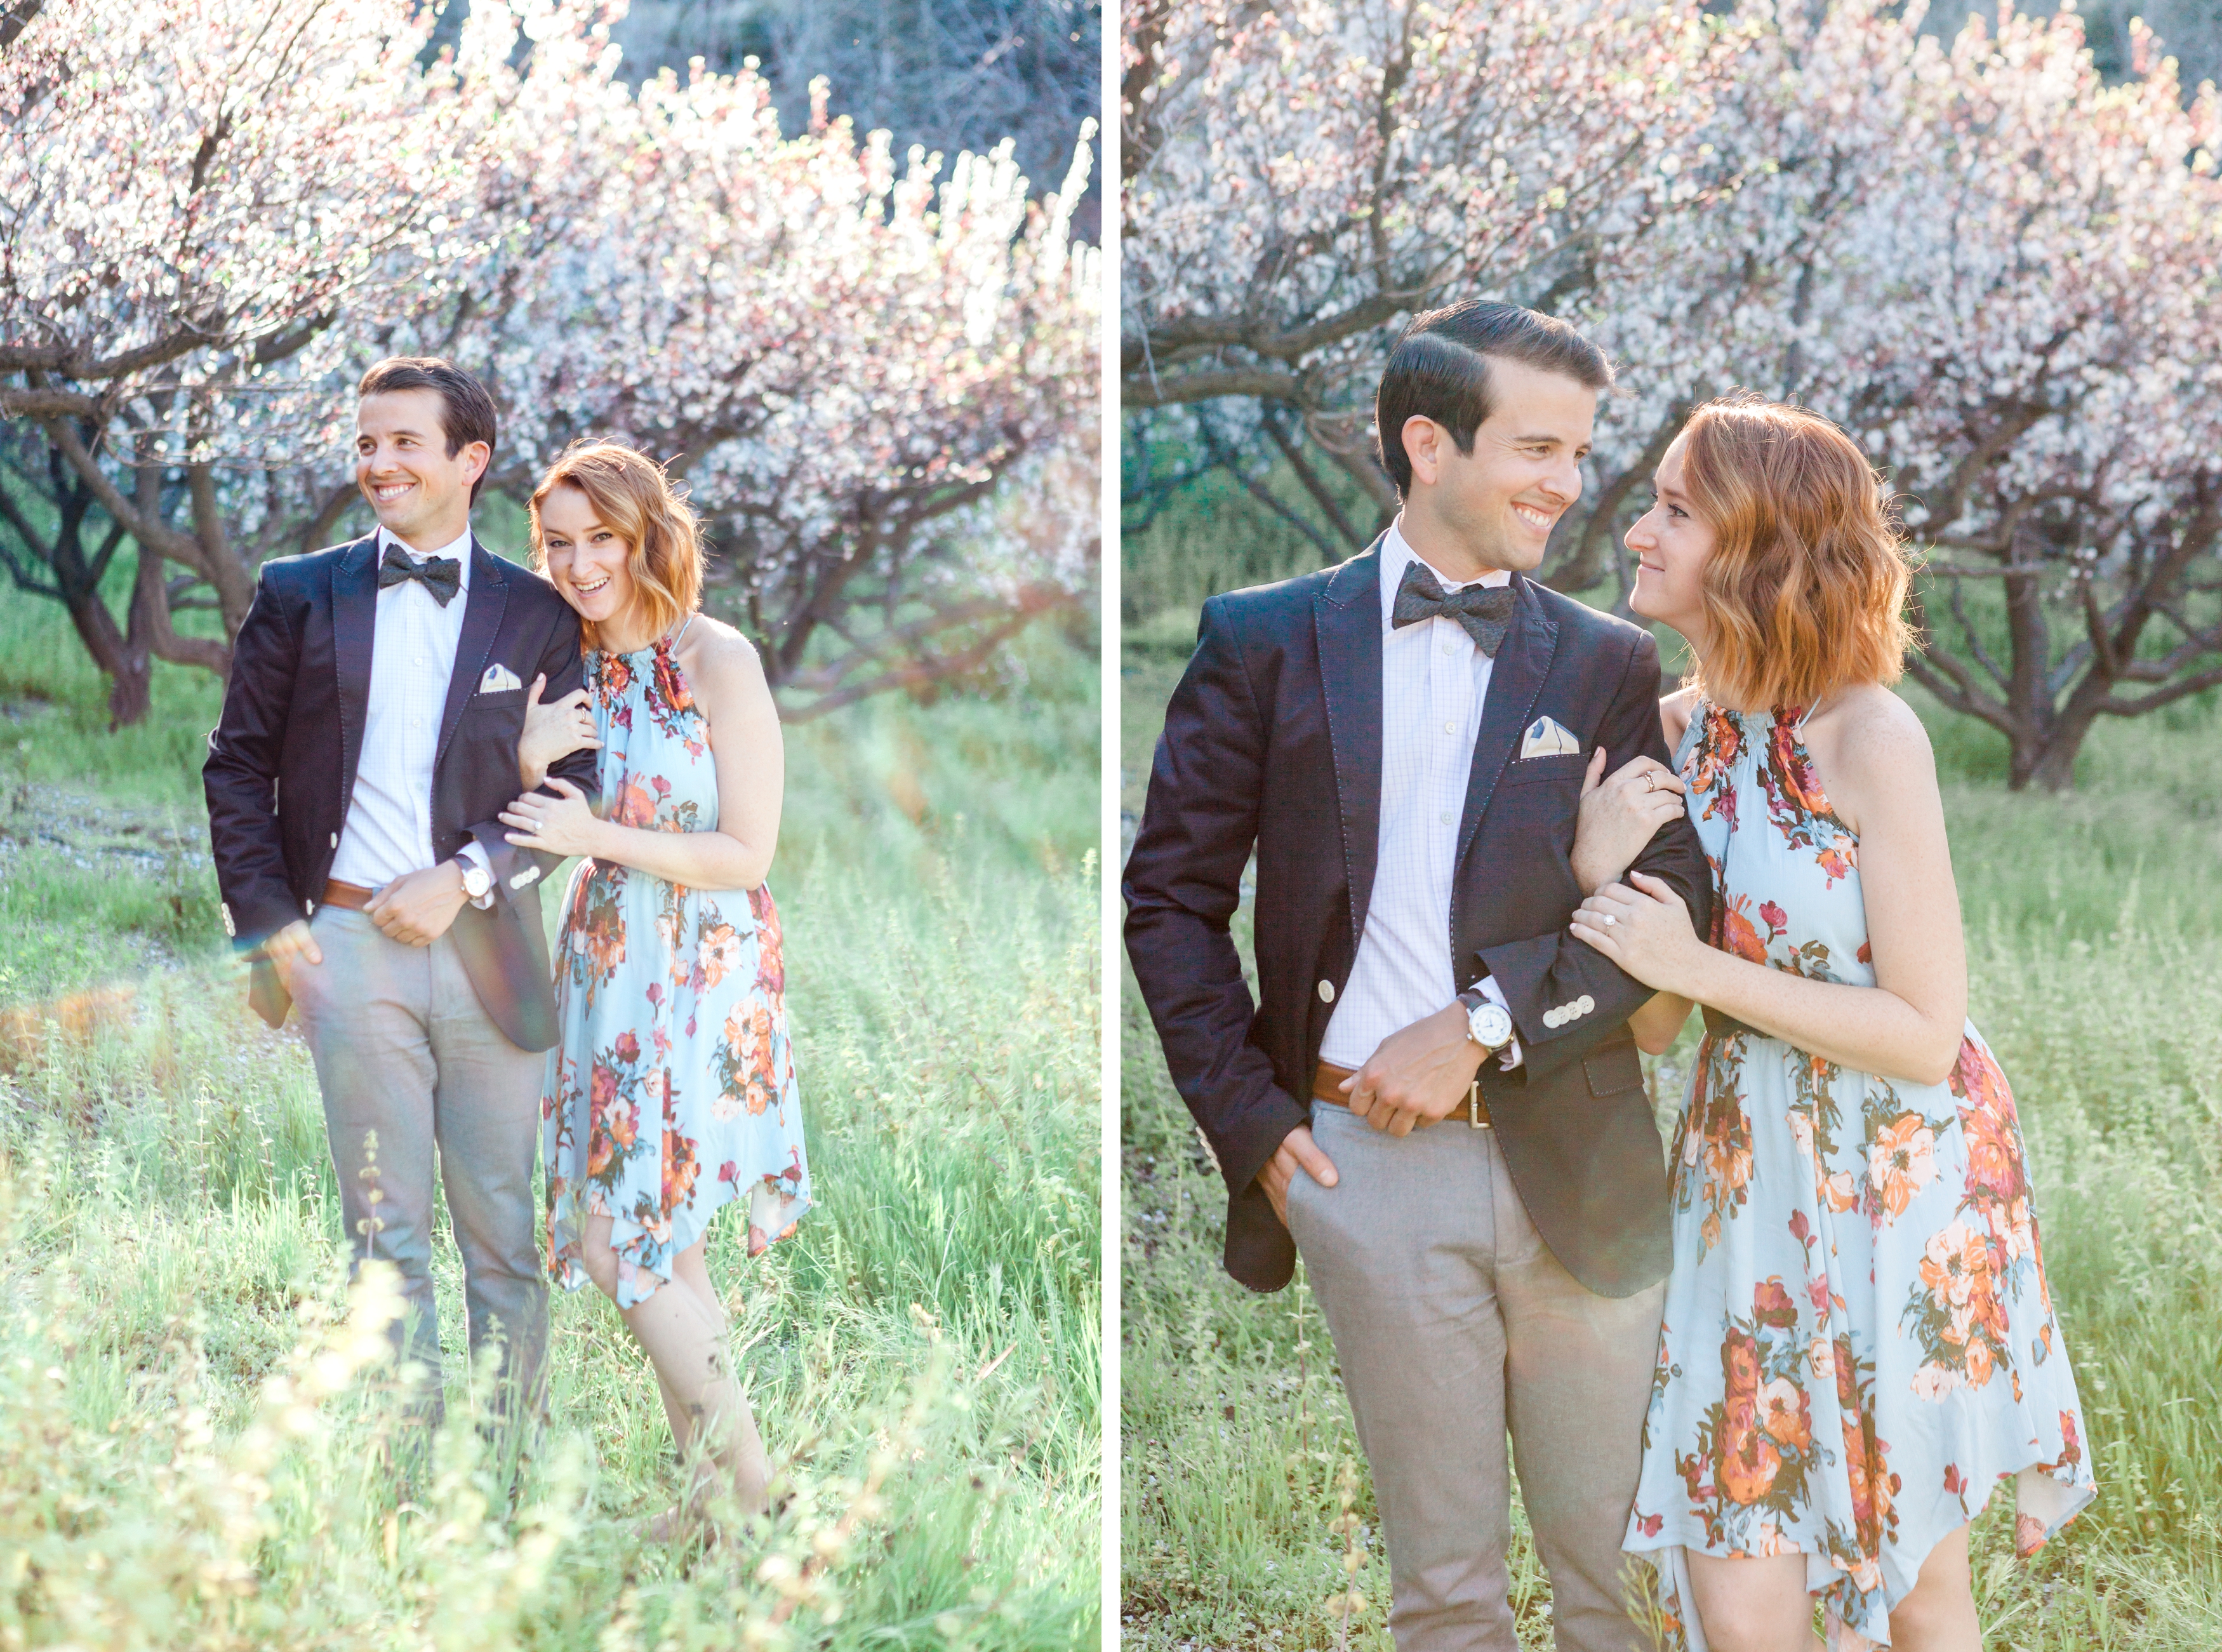 Glen Ivy hot springs corona ca wedding Cherry blossom trees carrie mcguire photography